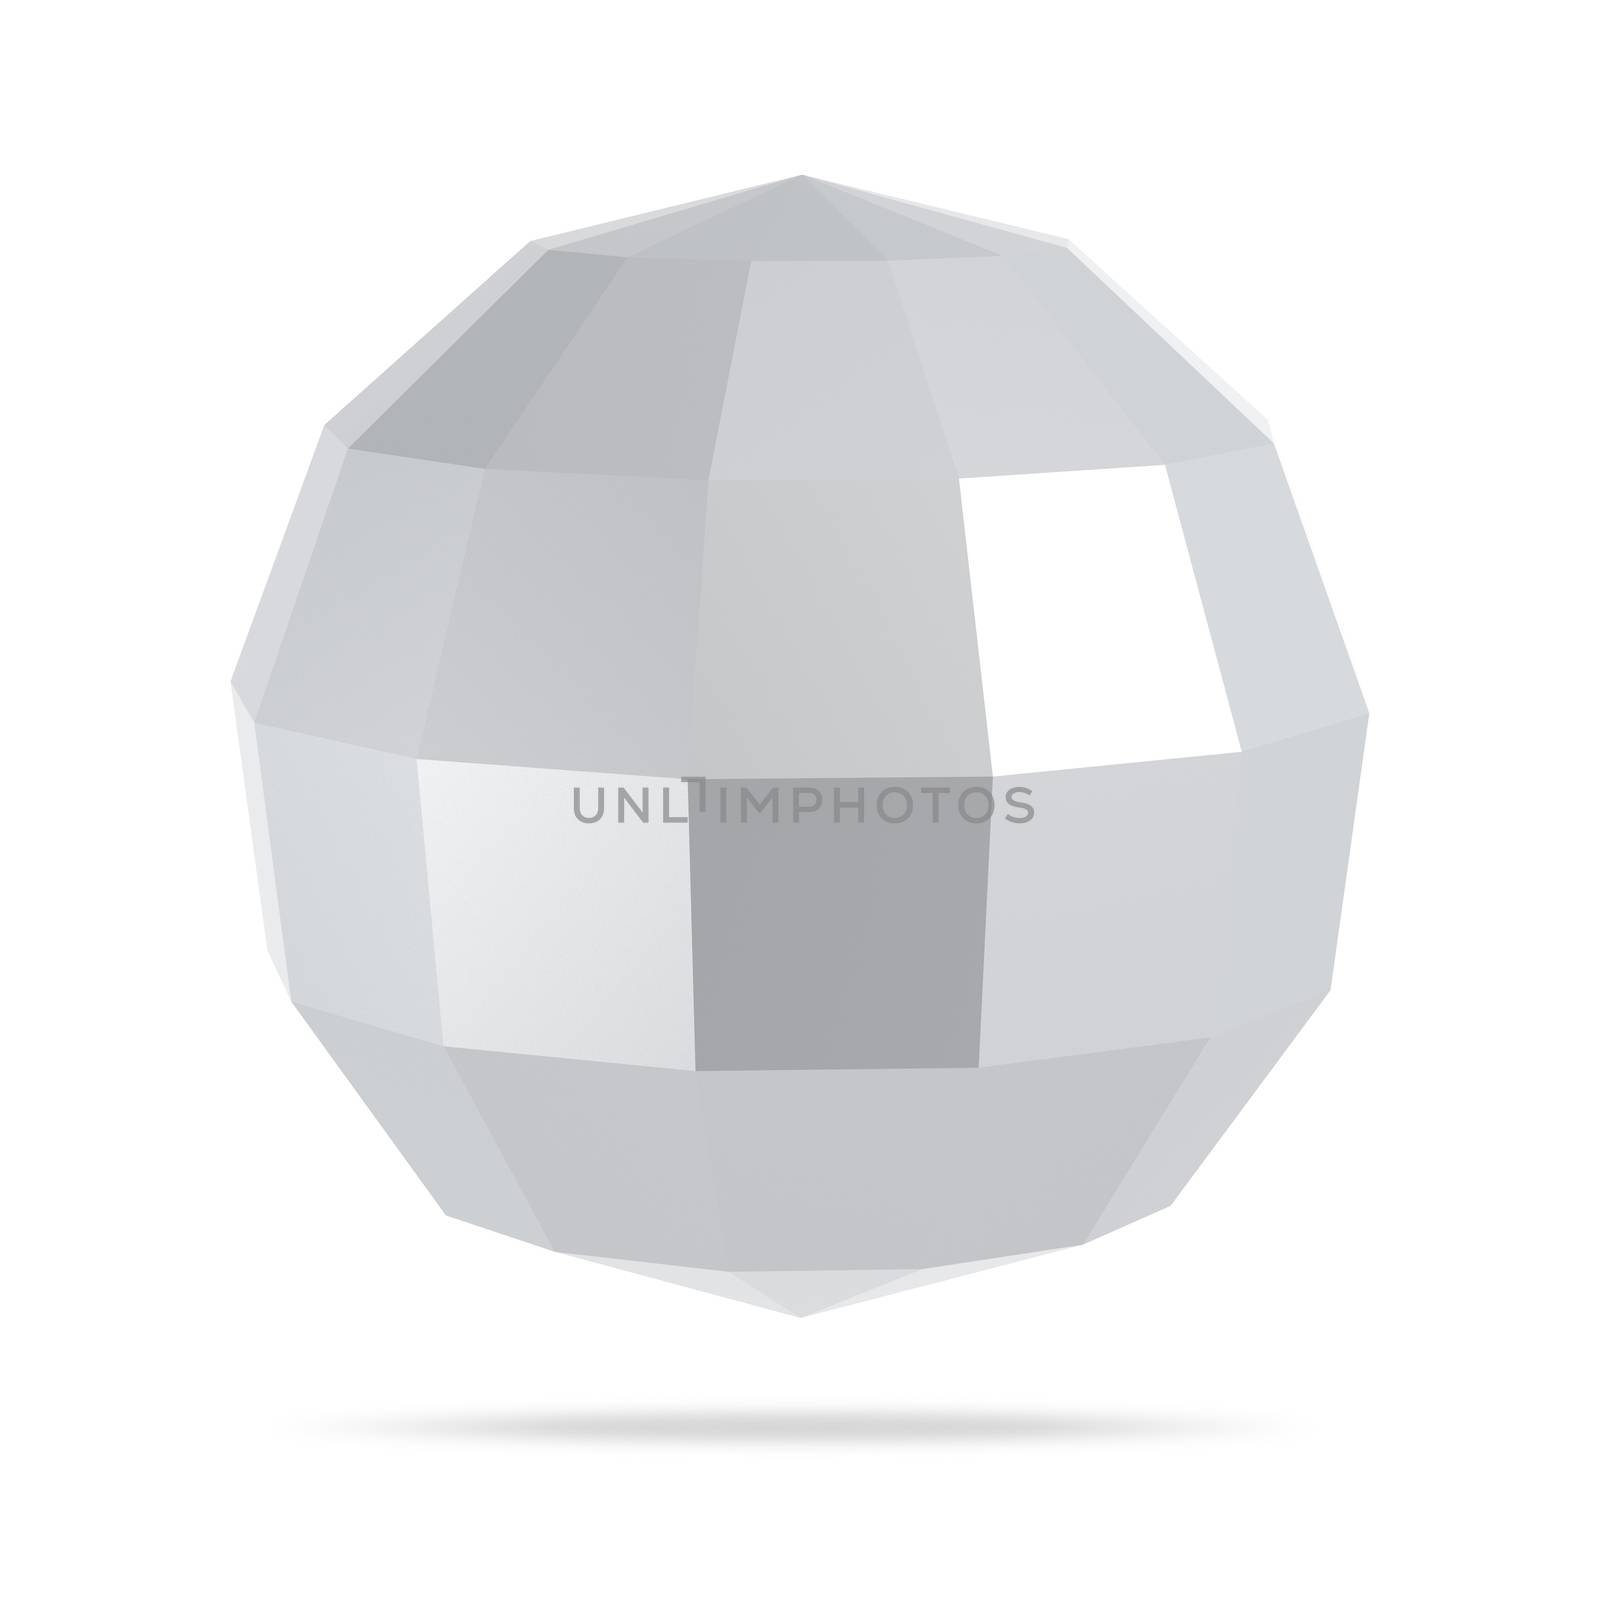 Abstract low poly 3d sphere on background